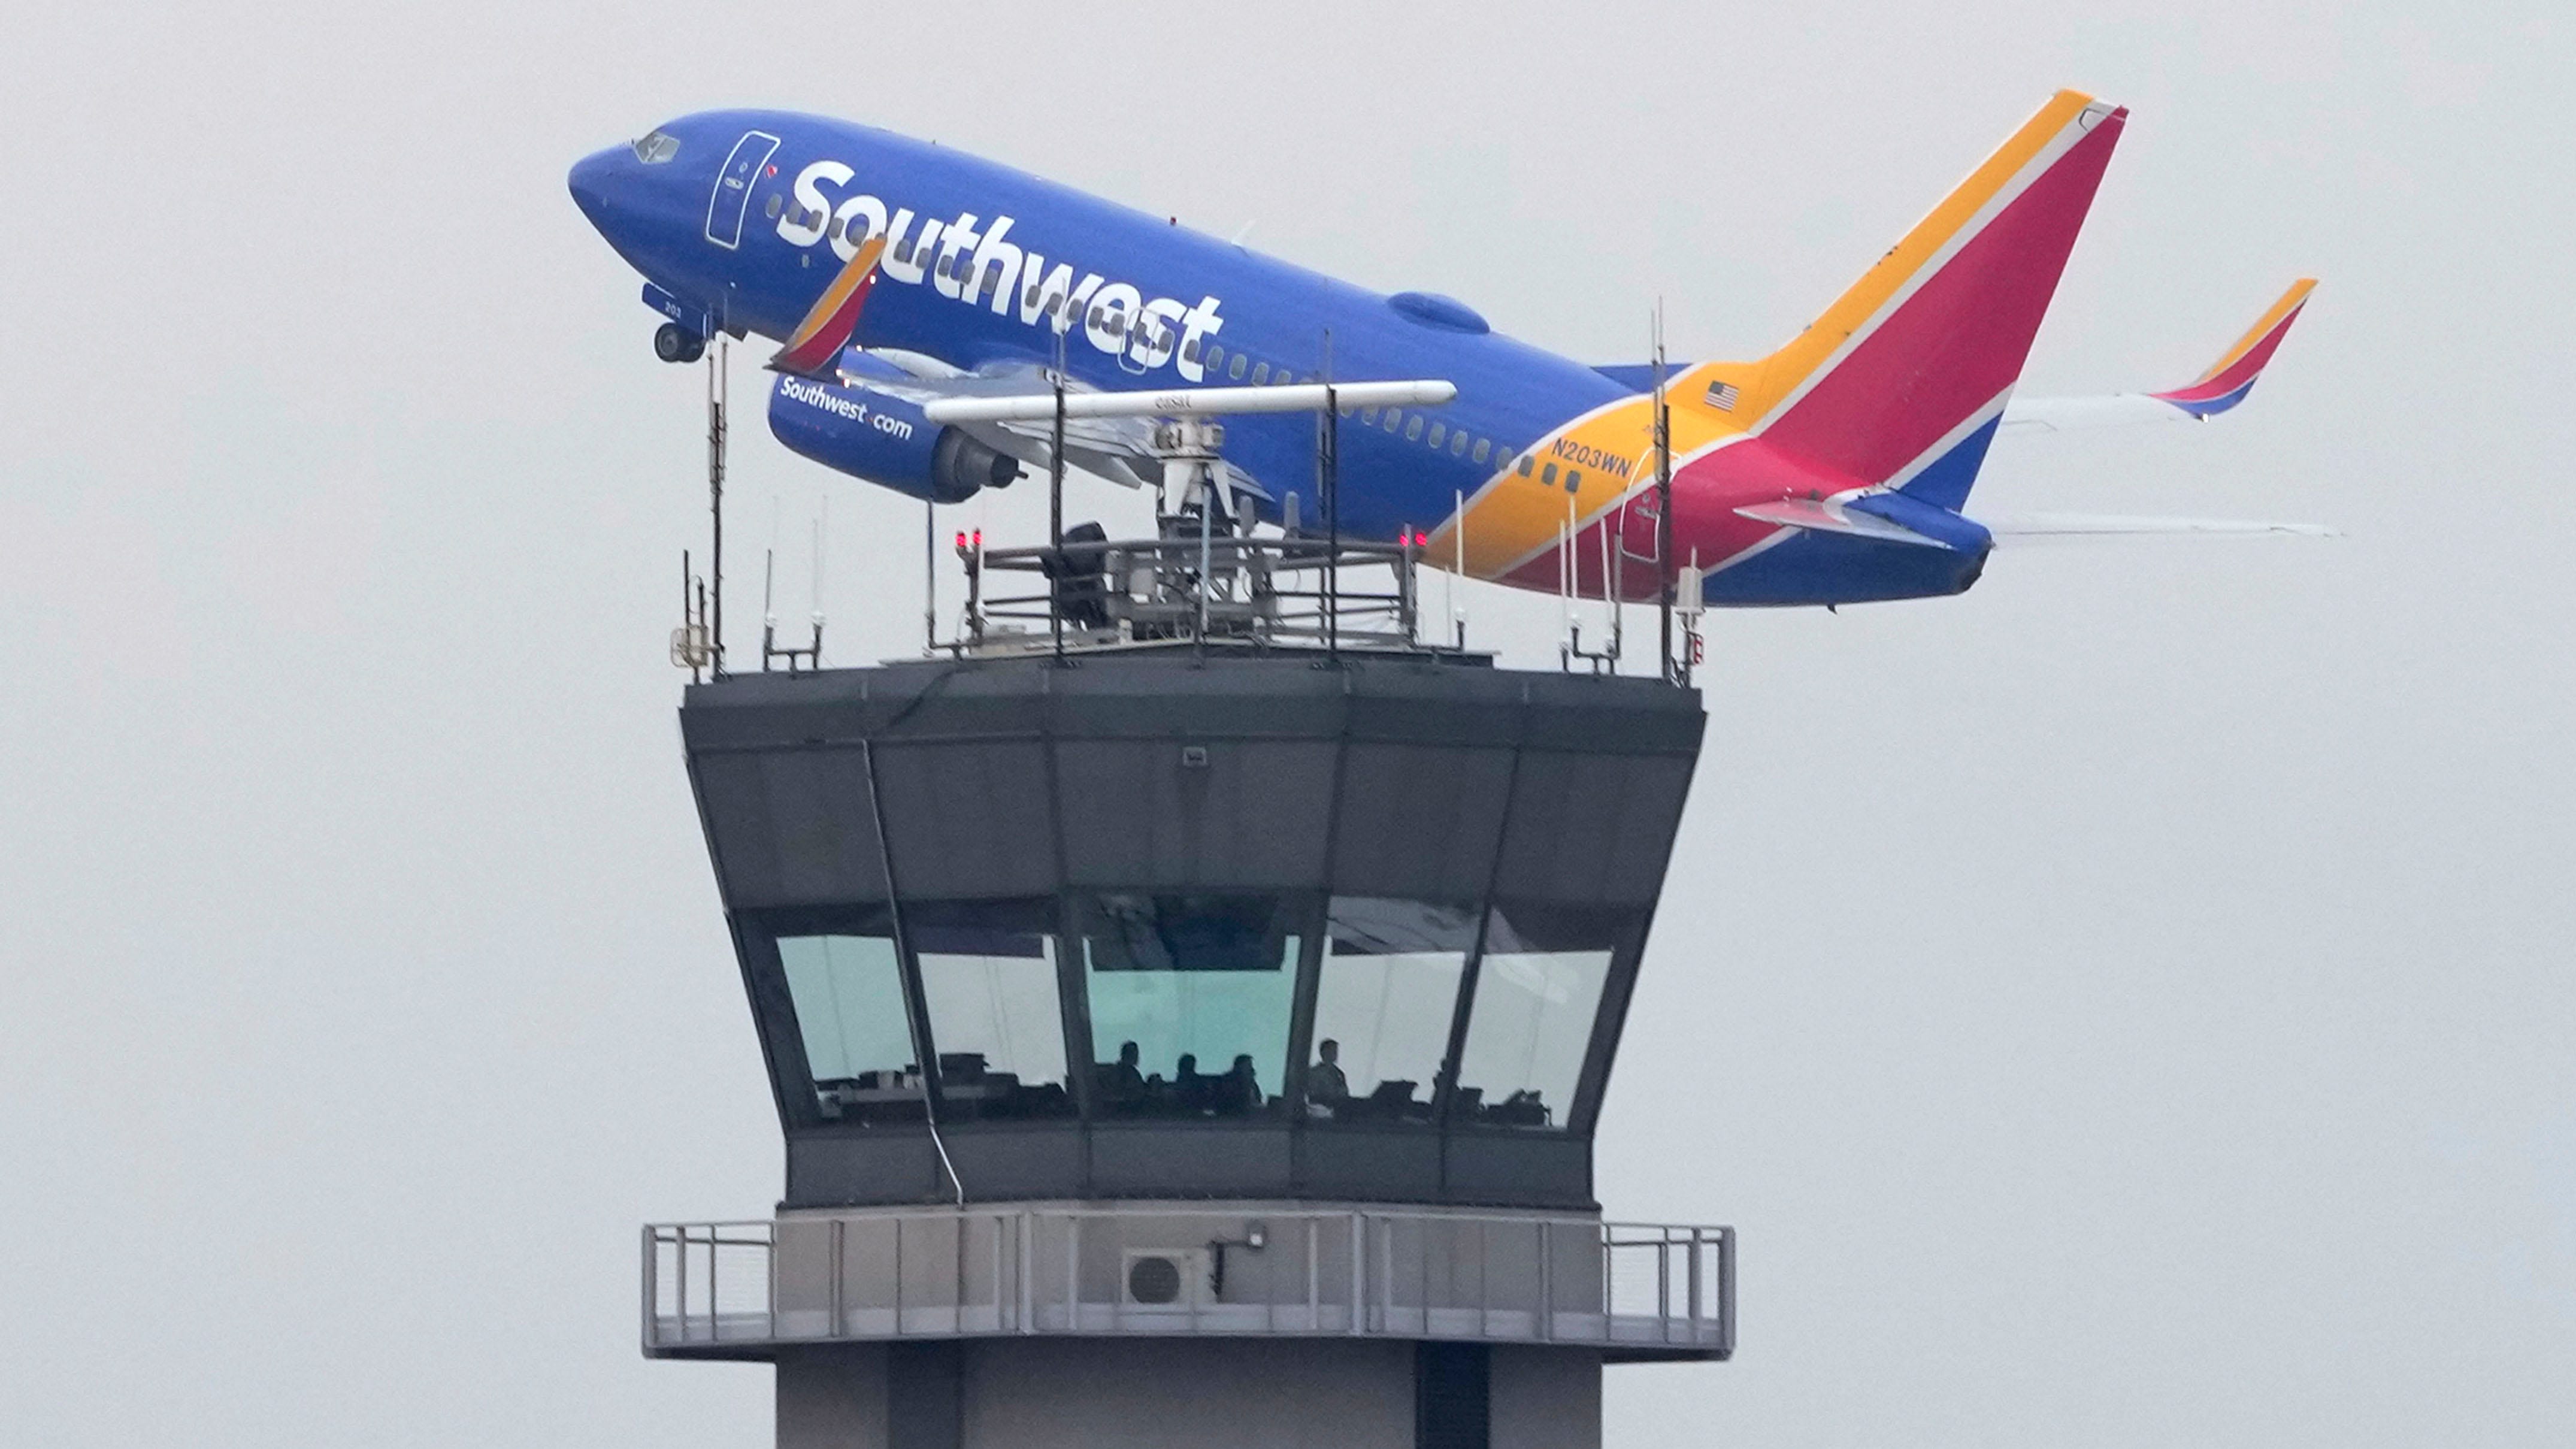 Southwest Airlines plane takes off in Chicago